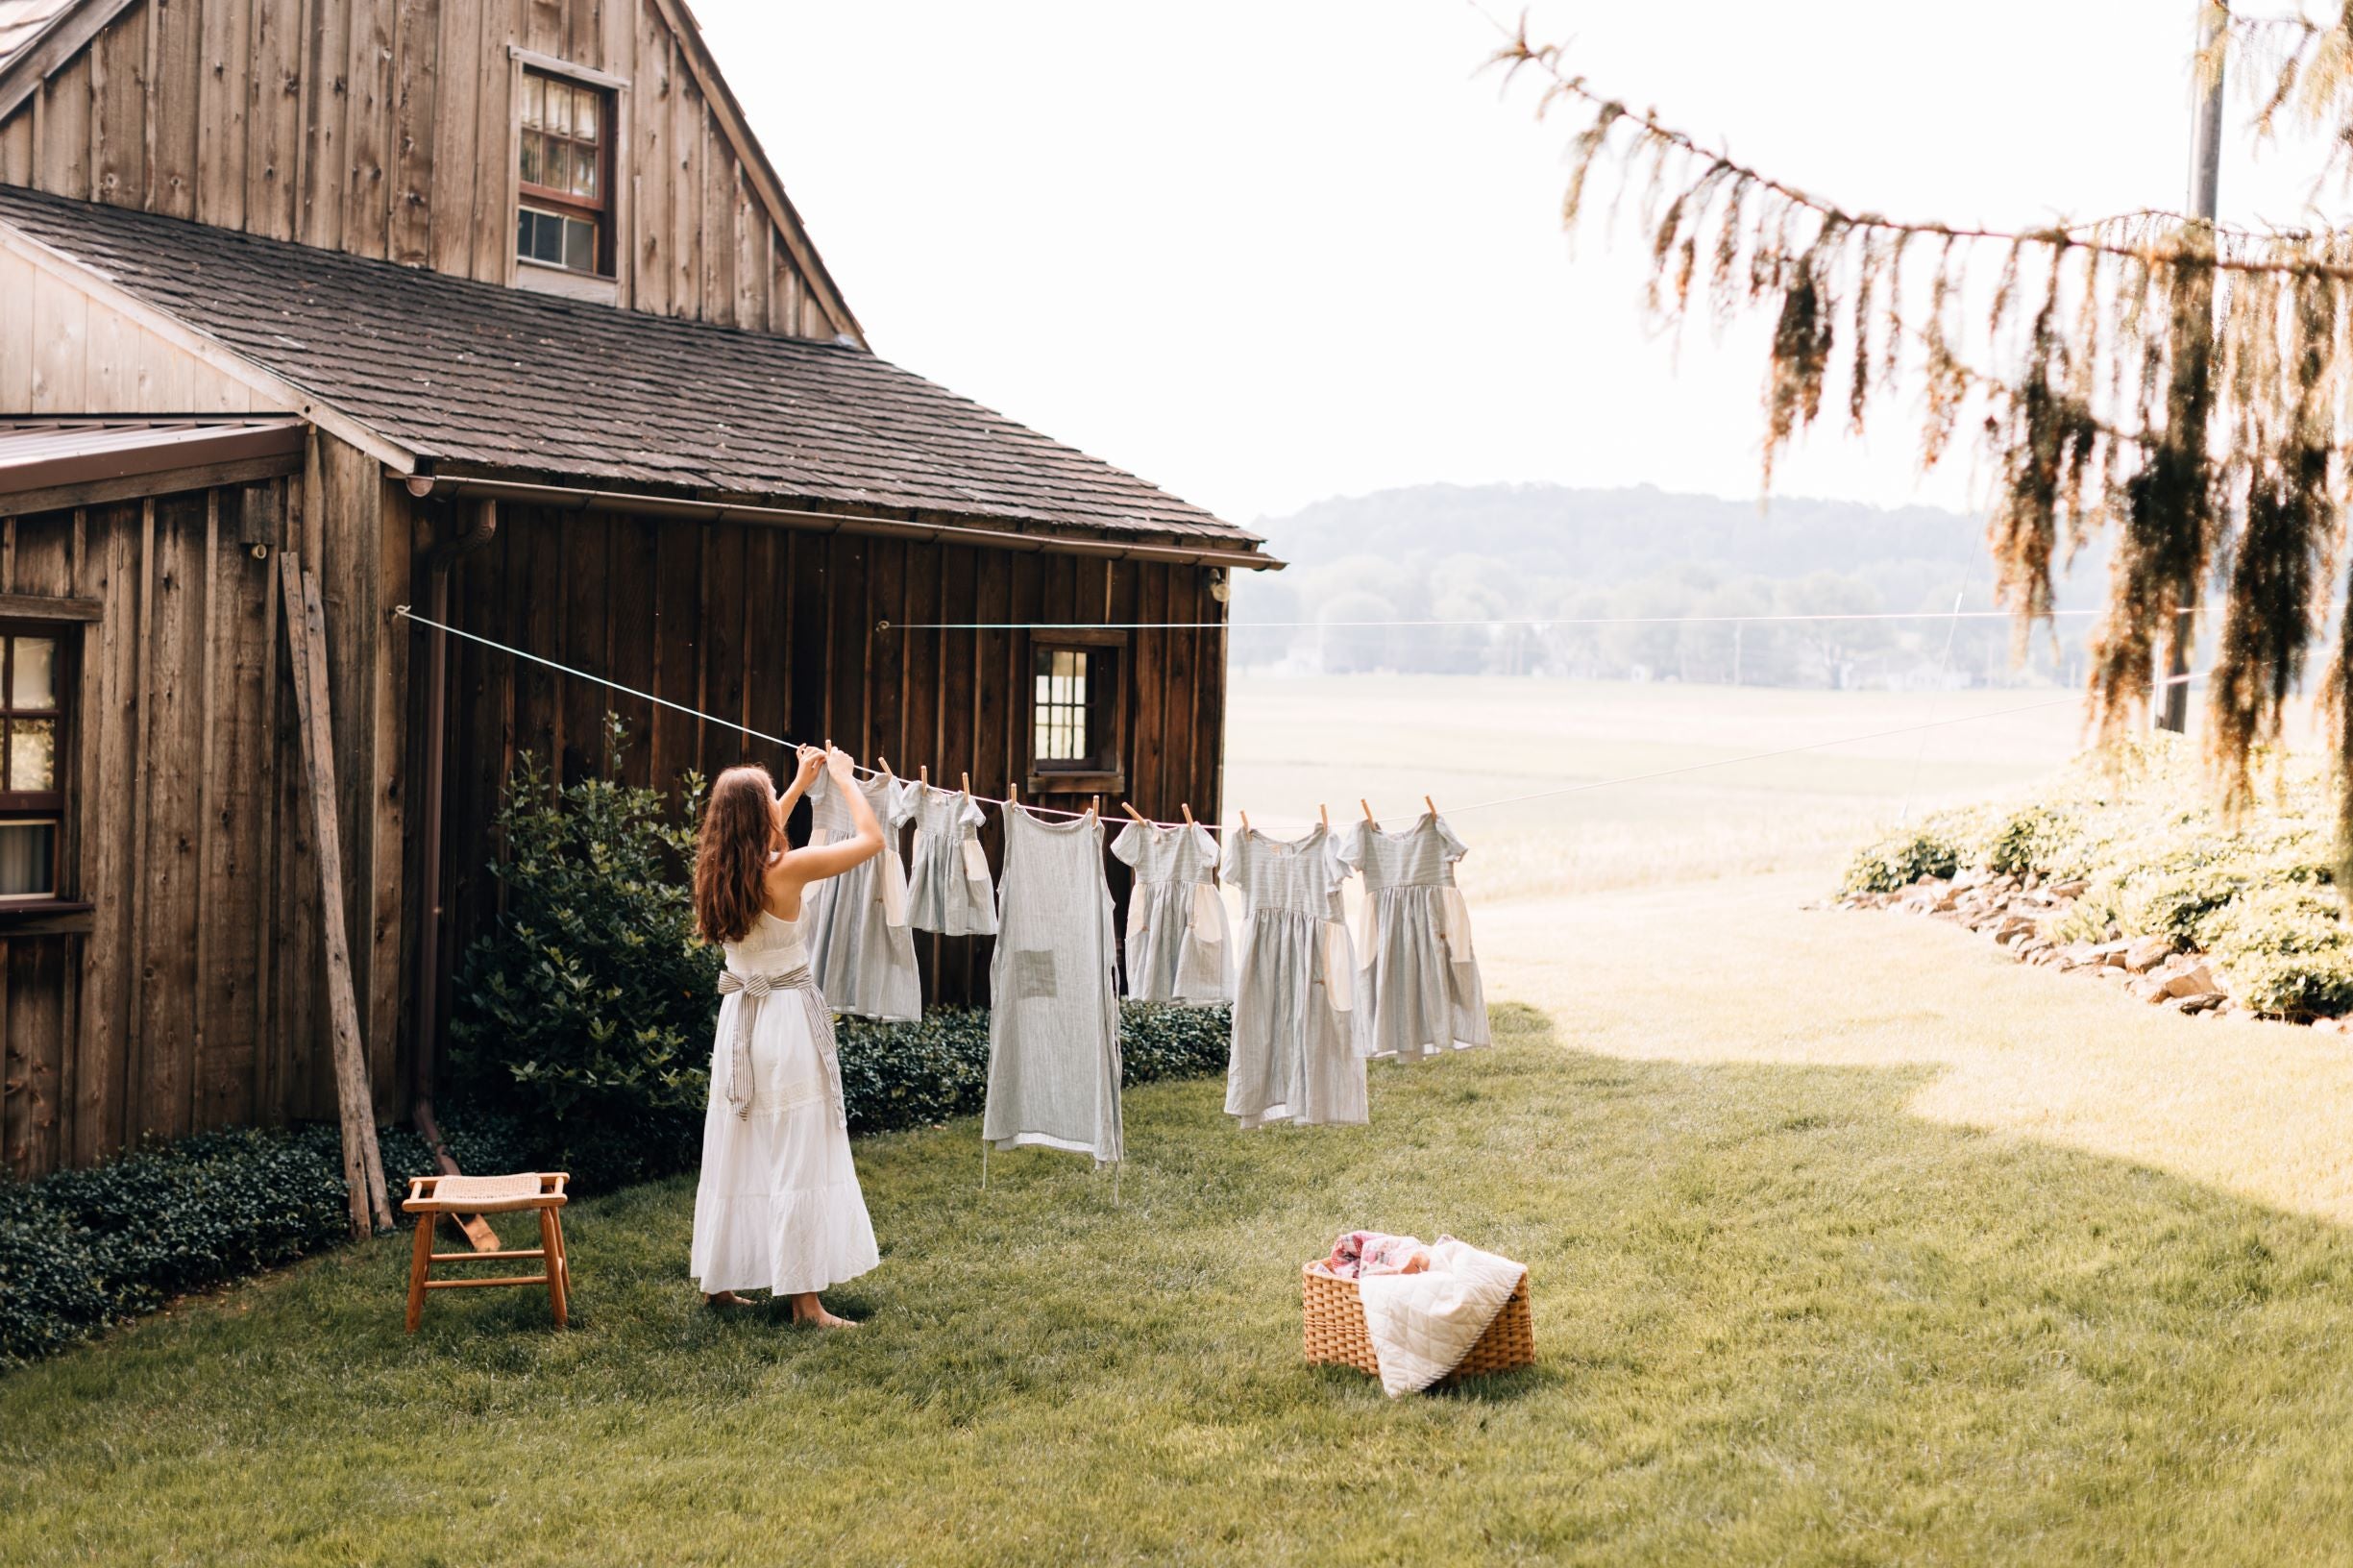 The Adult Linen Dress Hanging on a Clothesline 